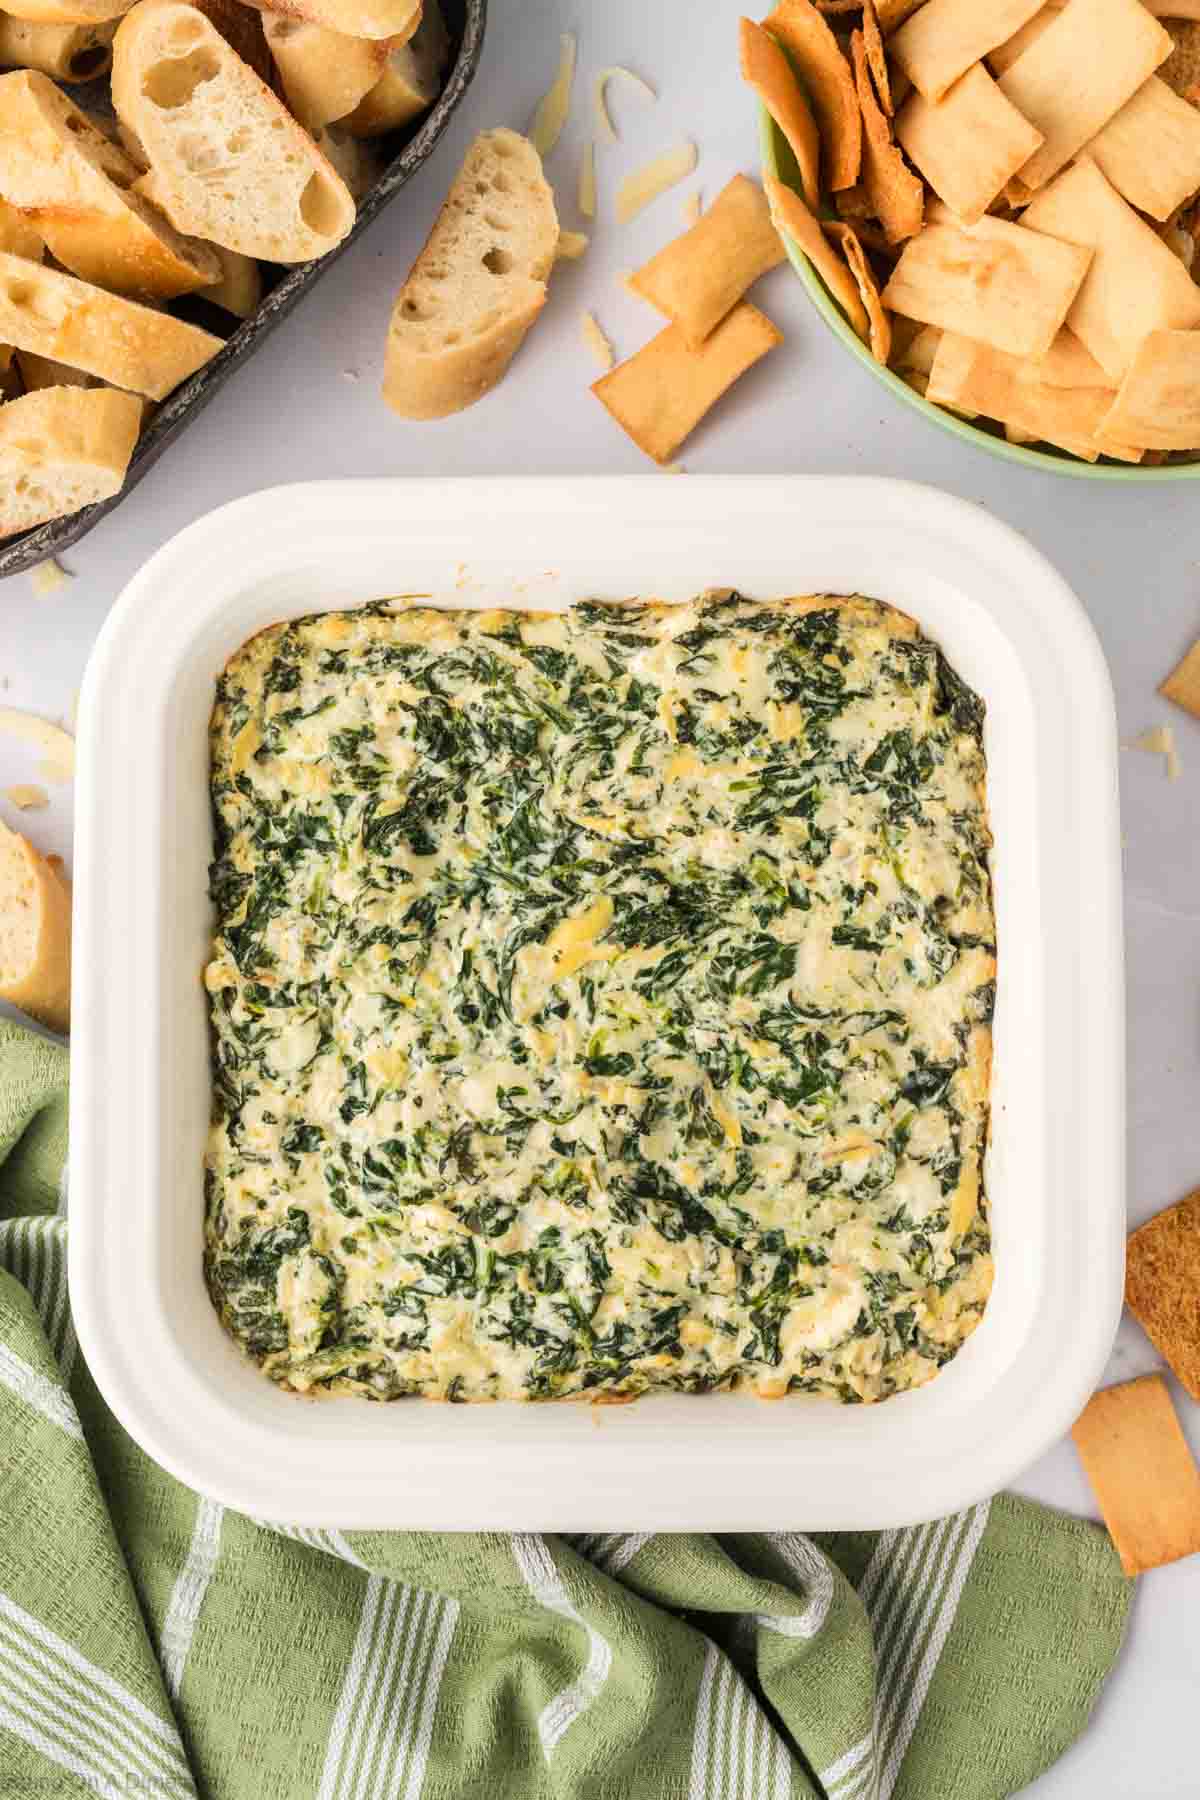 Spinach Artichoke Dip in a white casserole dish with a side of slice bread and chips